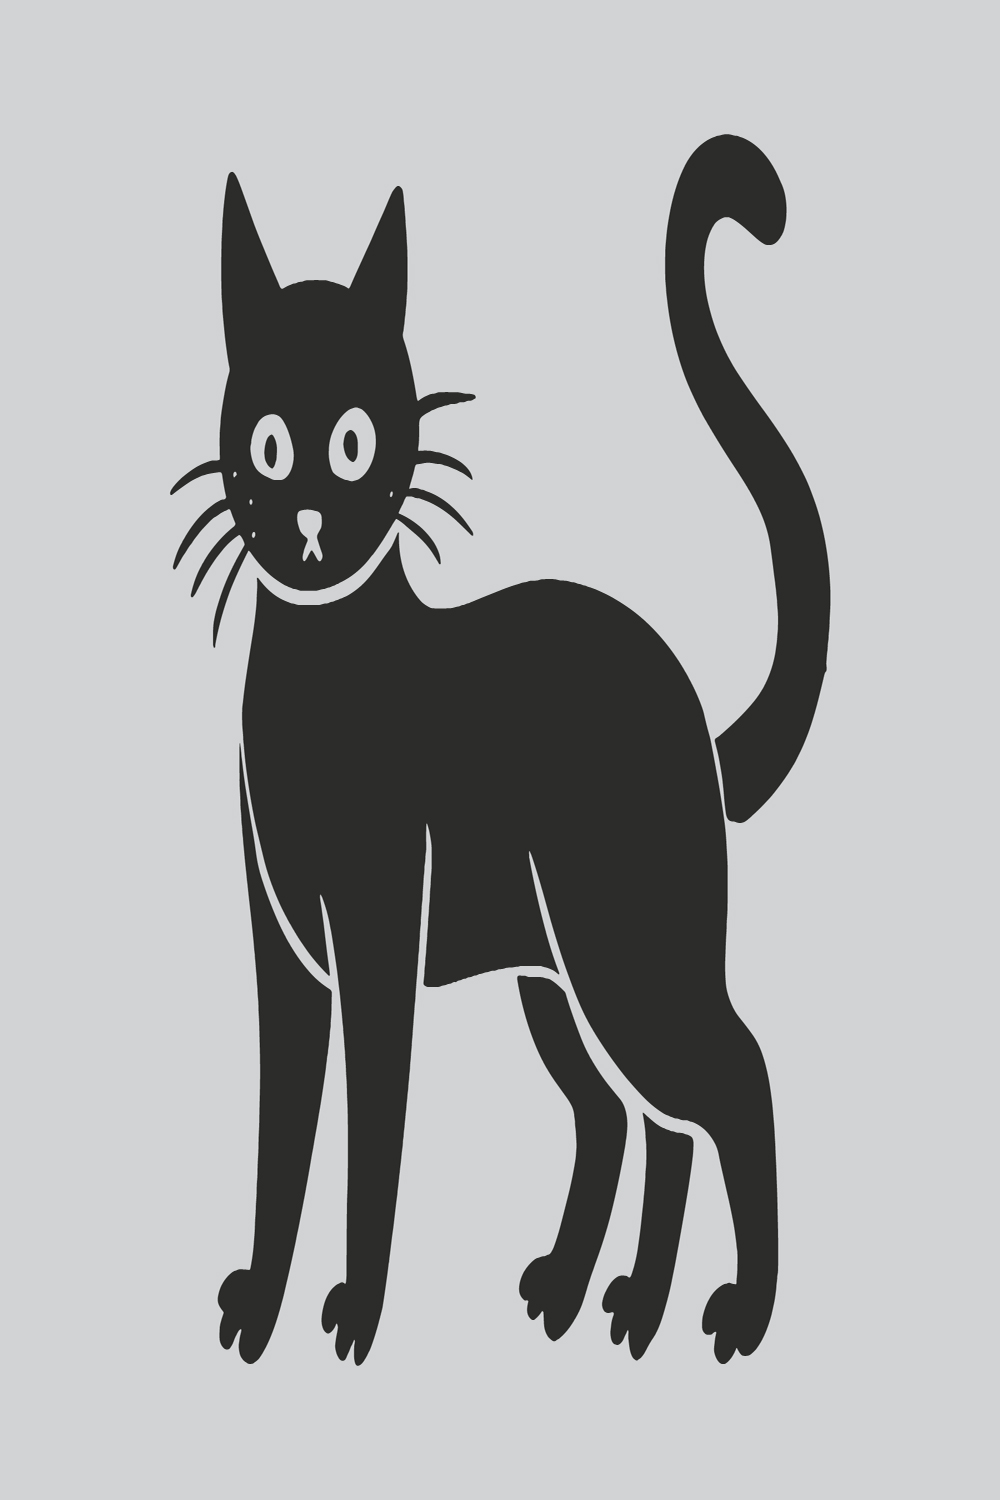 Hand drawn cat silhouette pinterest preview image.